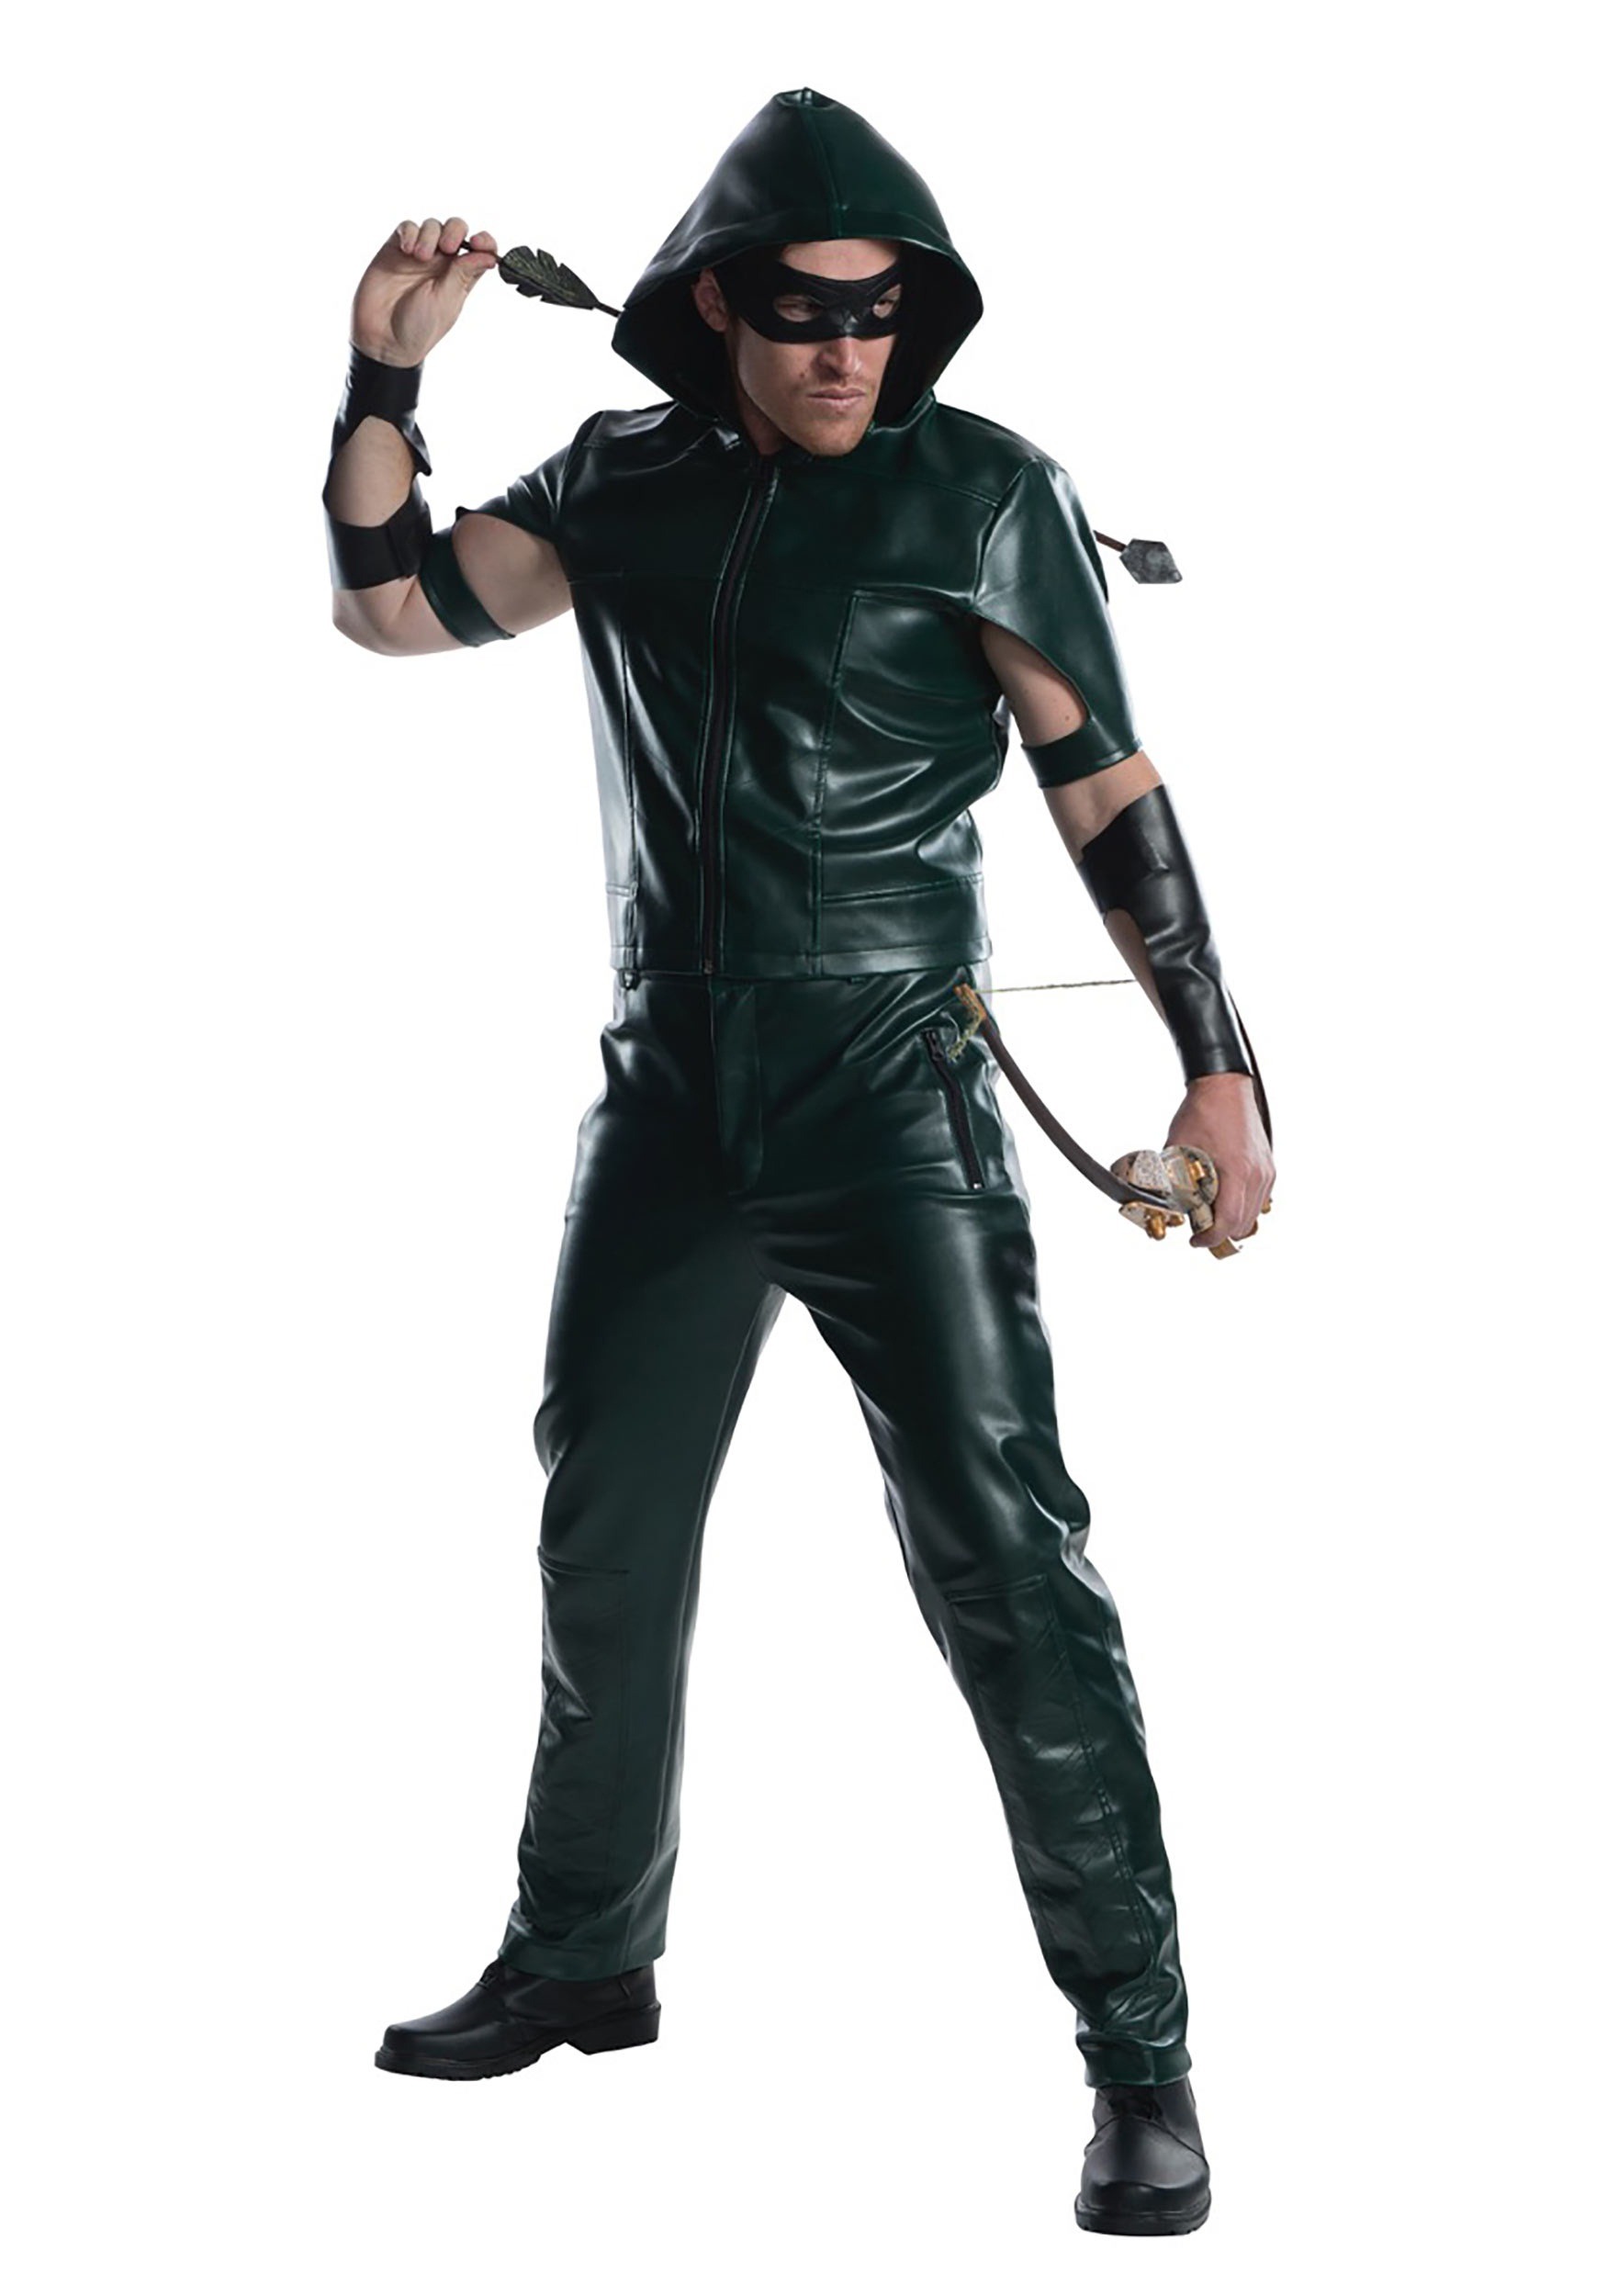 Image of Adult Deluxe Arrow Costume ID CH03202-S